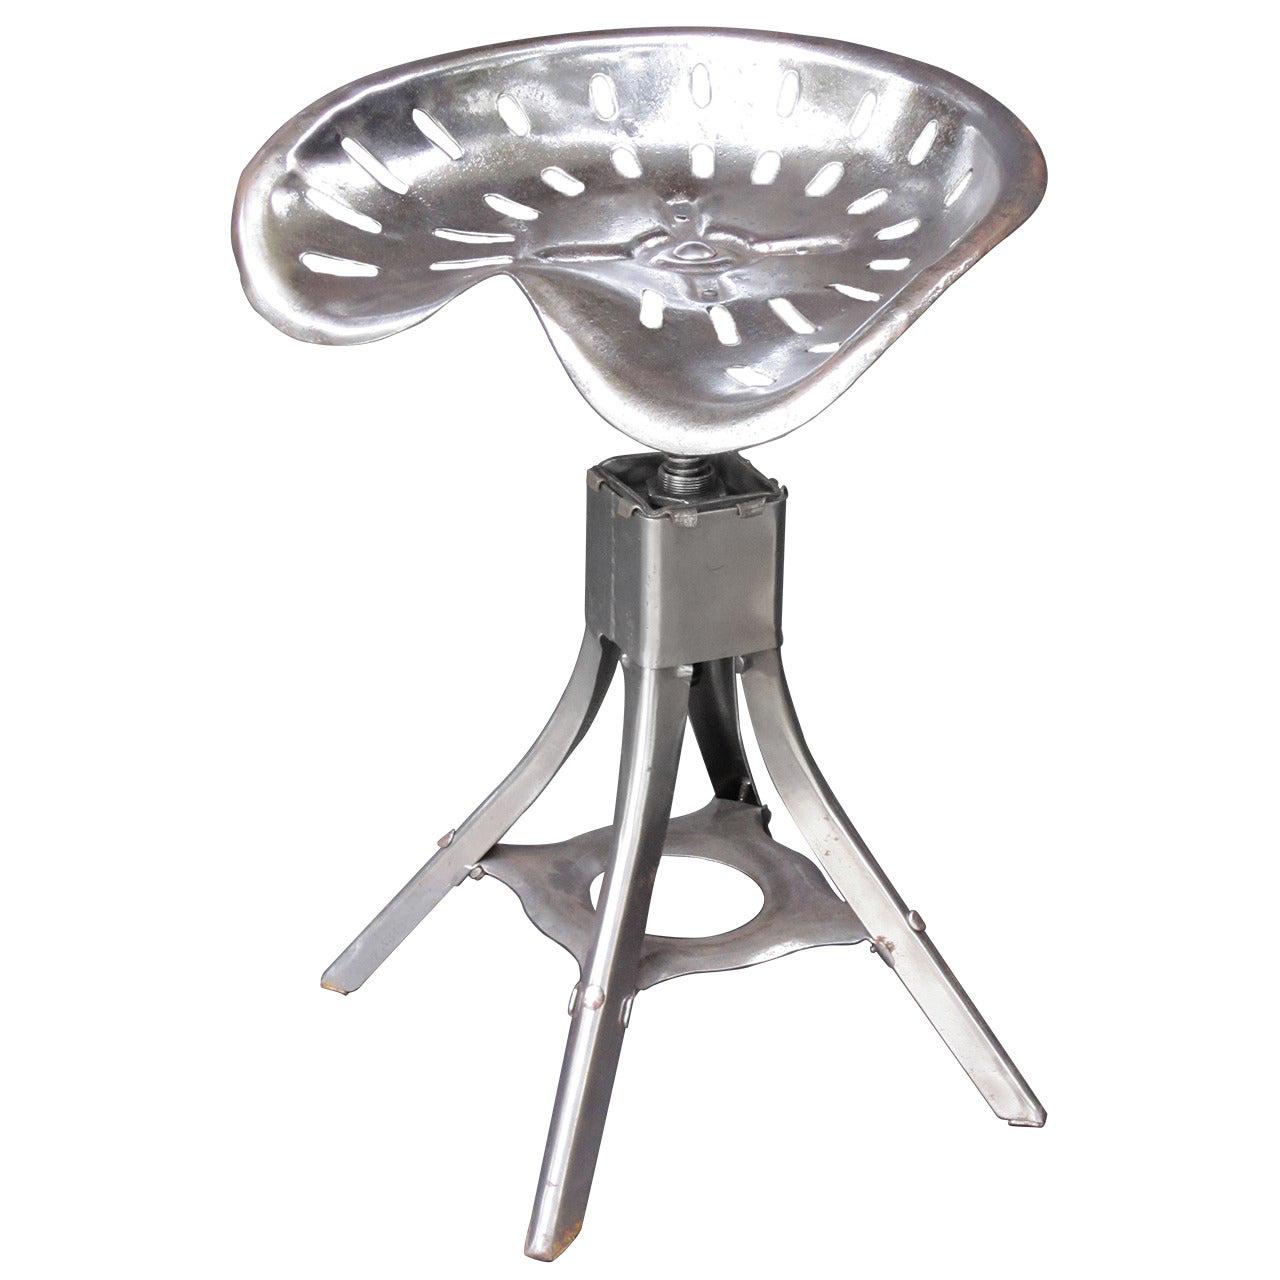 Tractor Seat Stool of Polished Steel from England